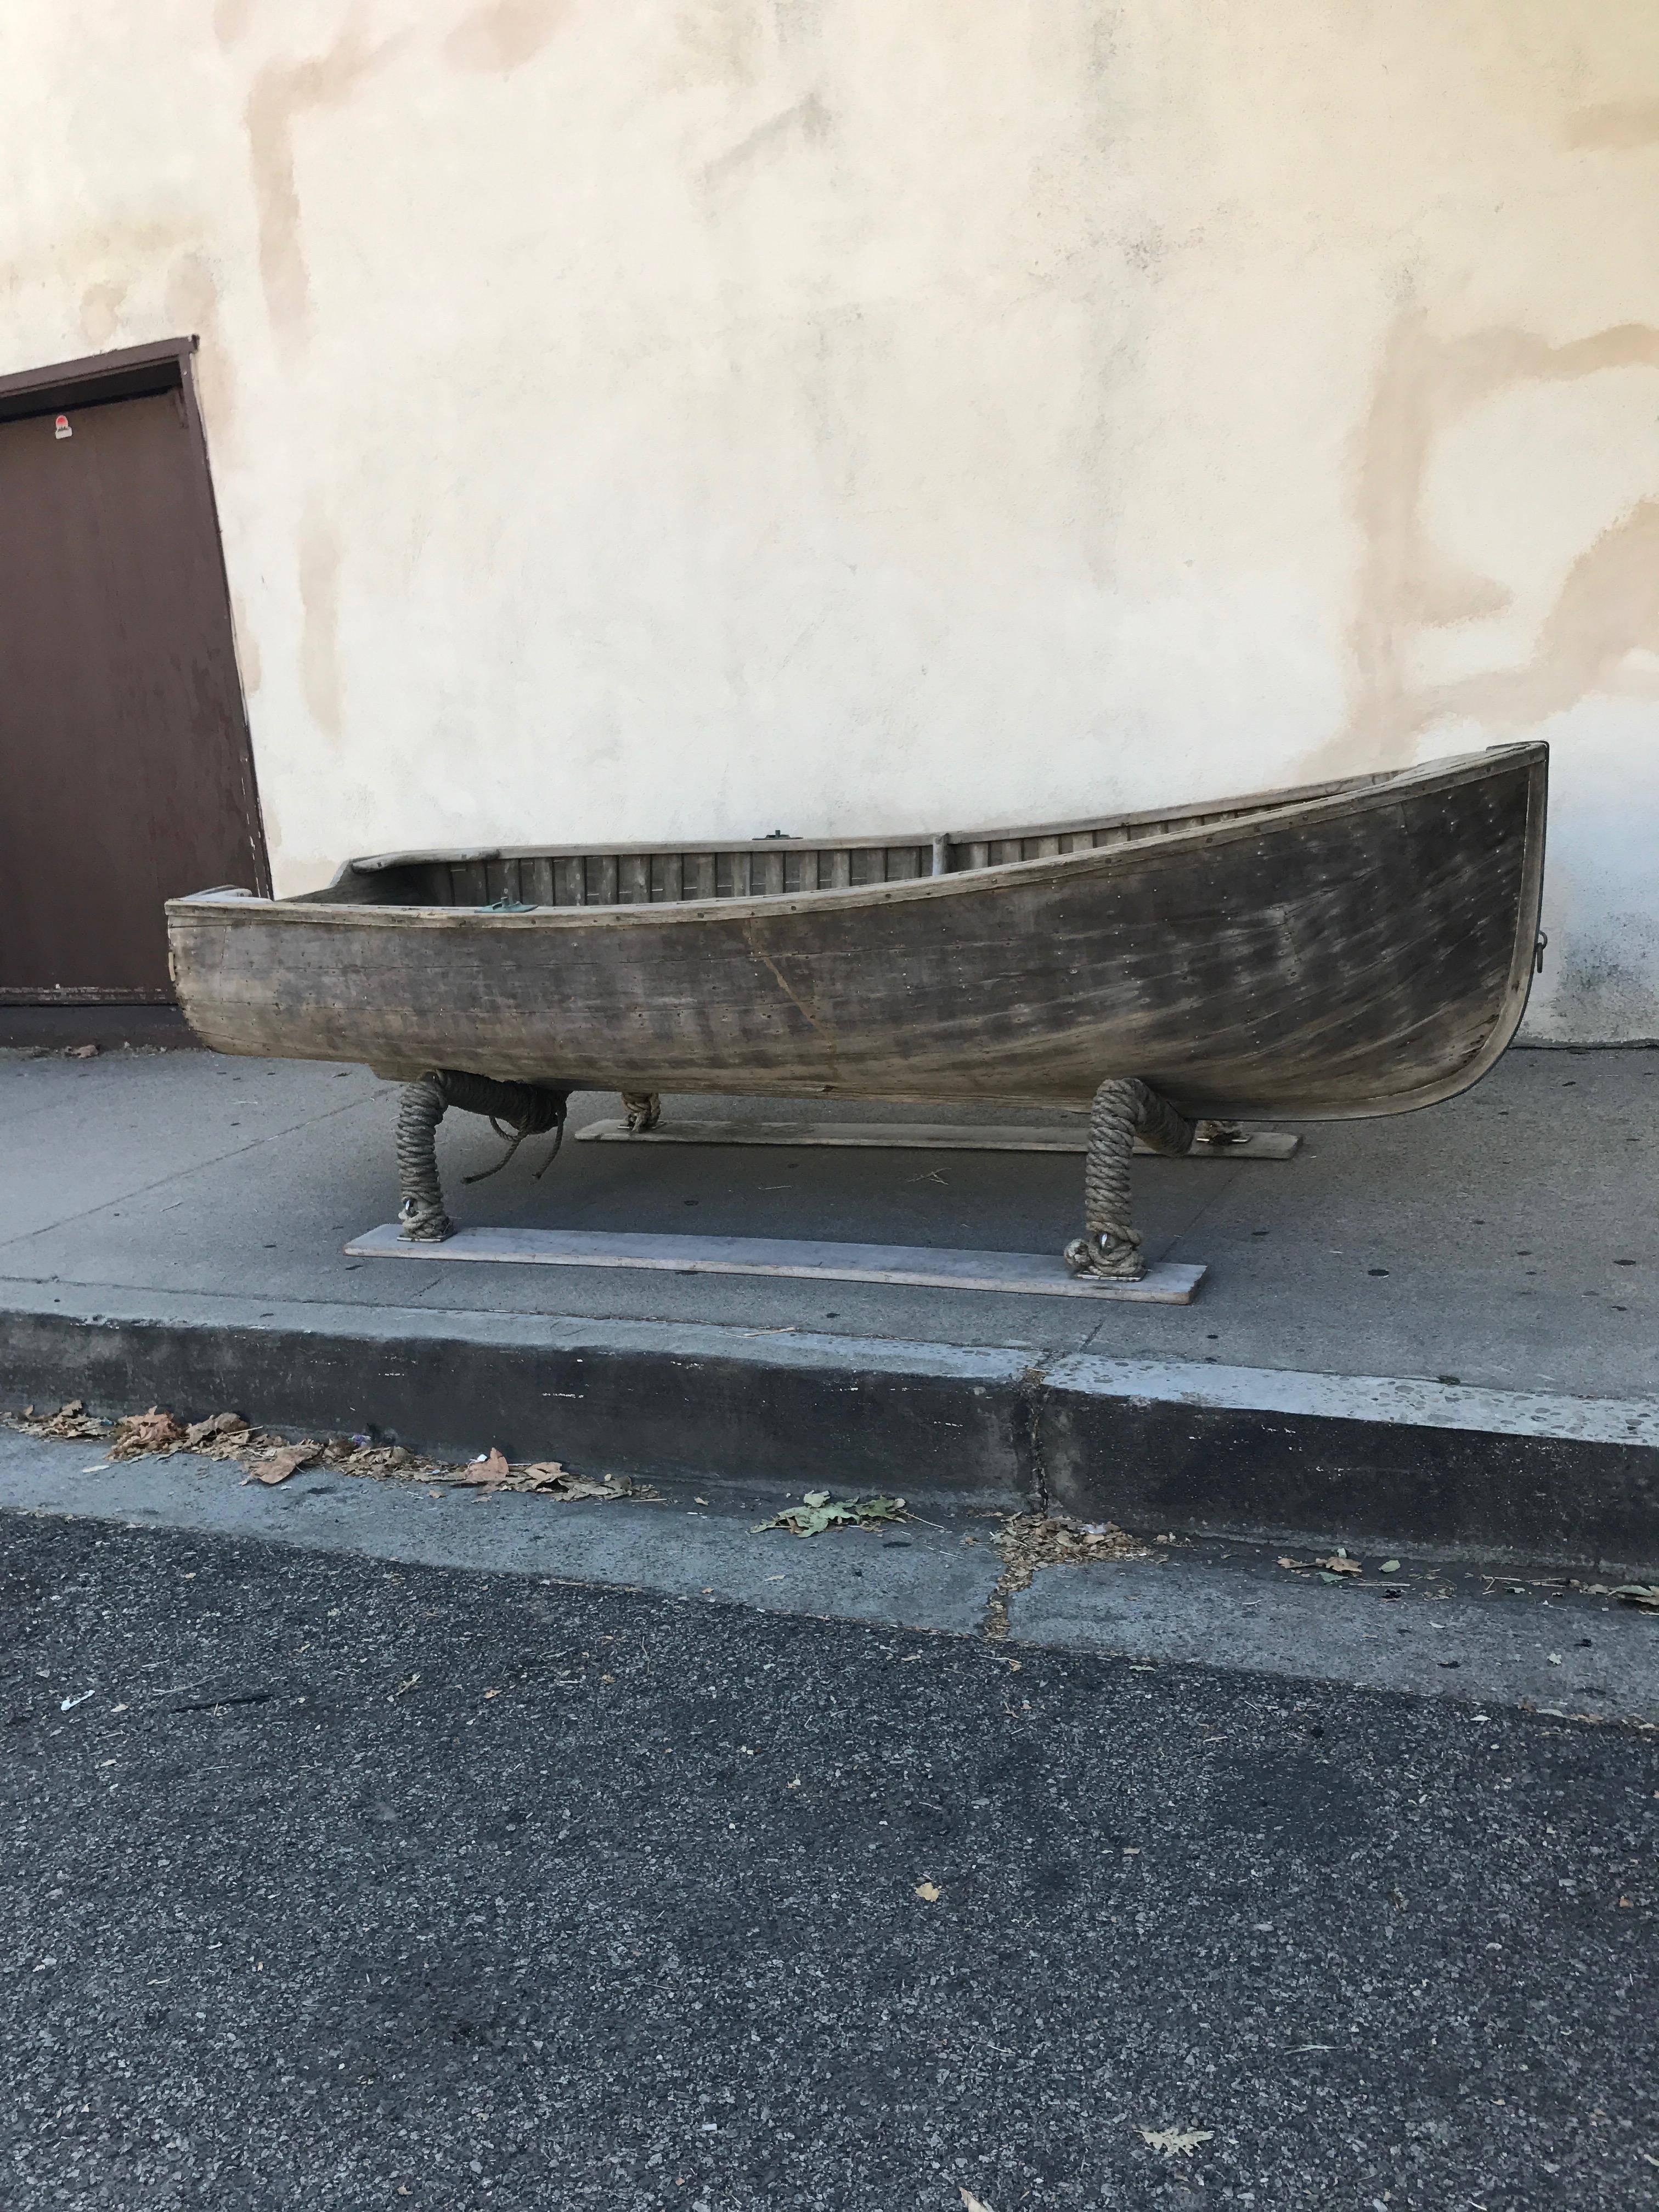 Beautiful antique rowboat, circa 1930s-1940s. Wonderful in a garden filled with plants or for outdoor party seating.